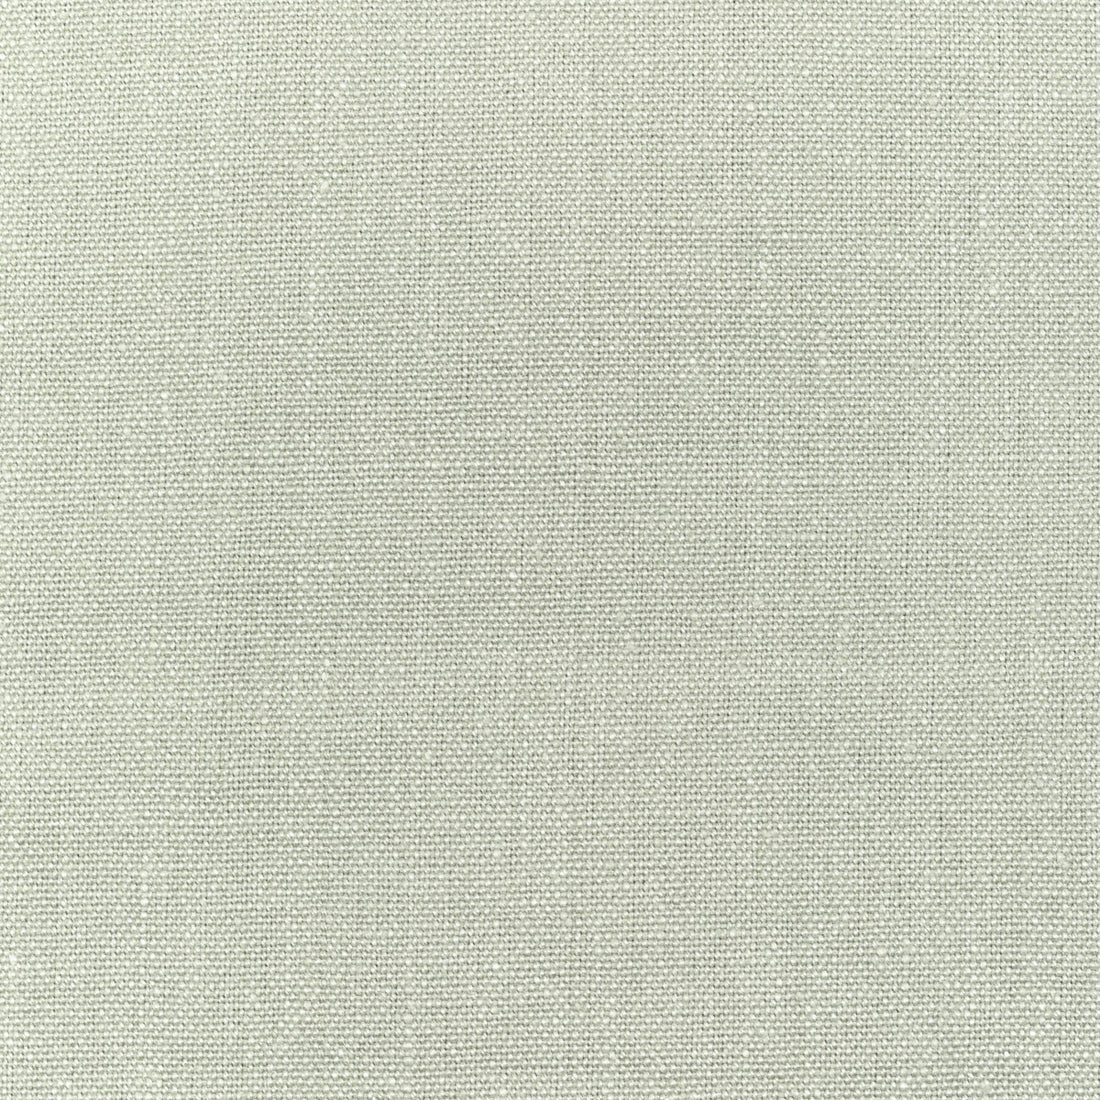 Watermill Linen fabric in sky color - pattern 2012176.115.0 - by Lee Jofa in the Colour Complements II collection